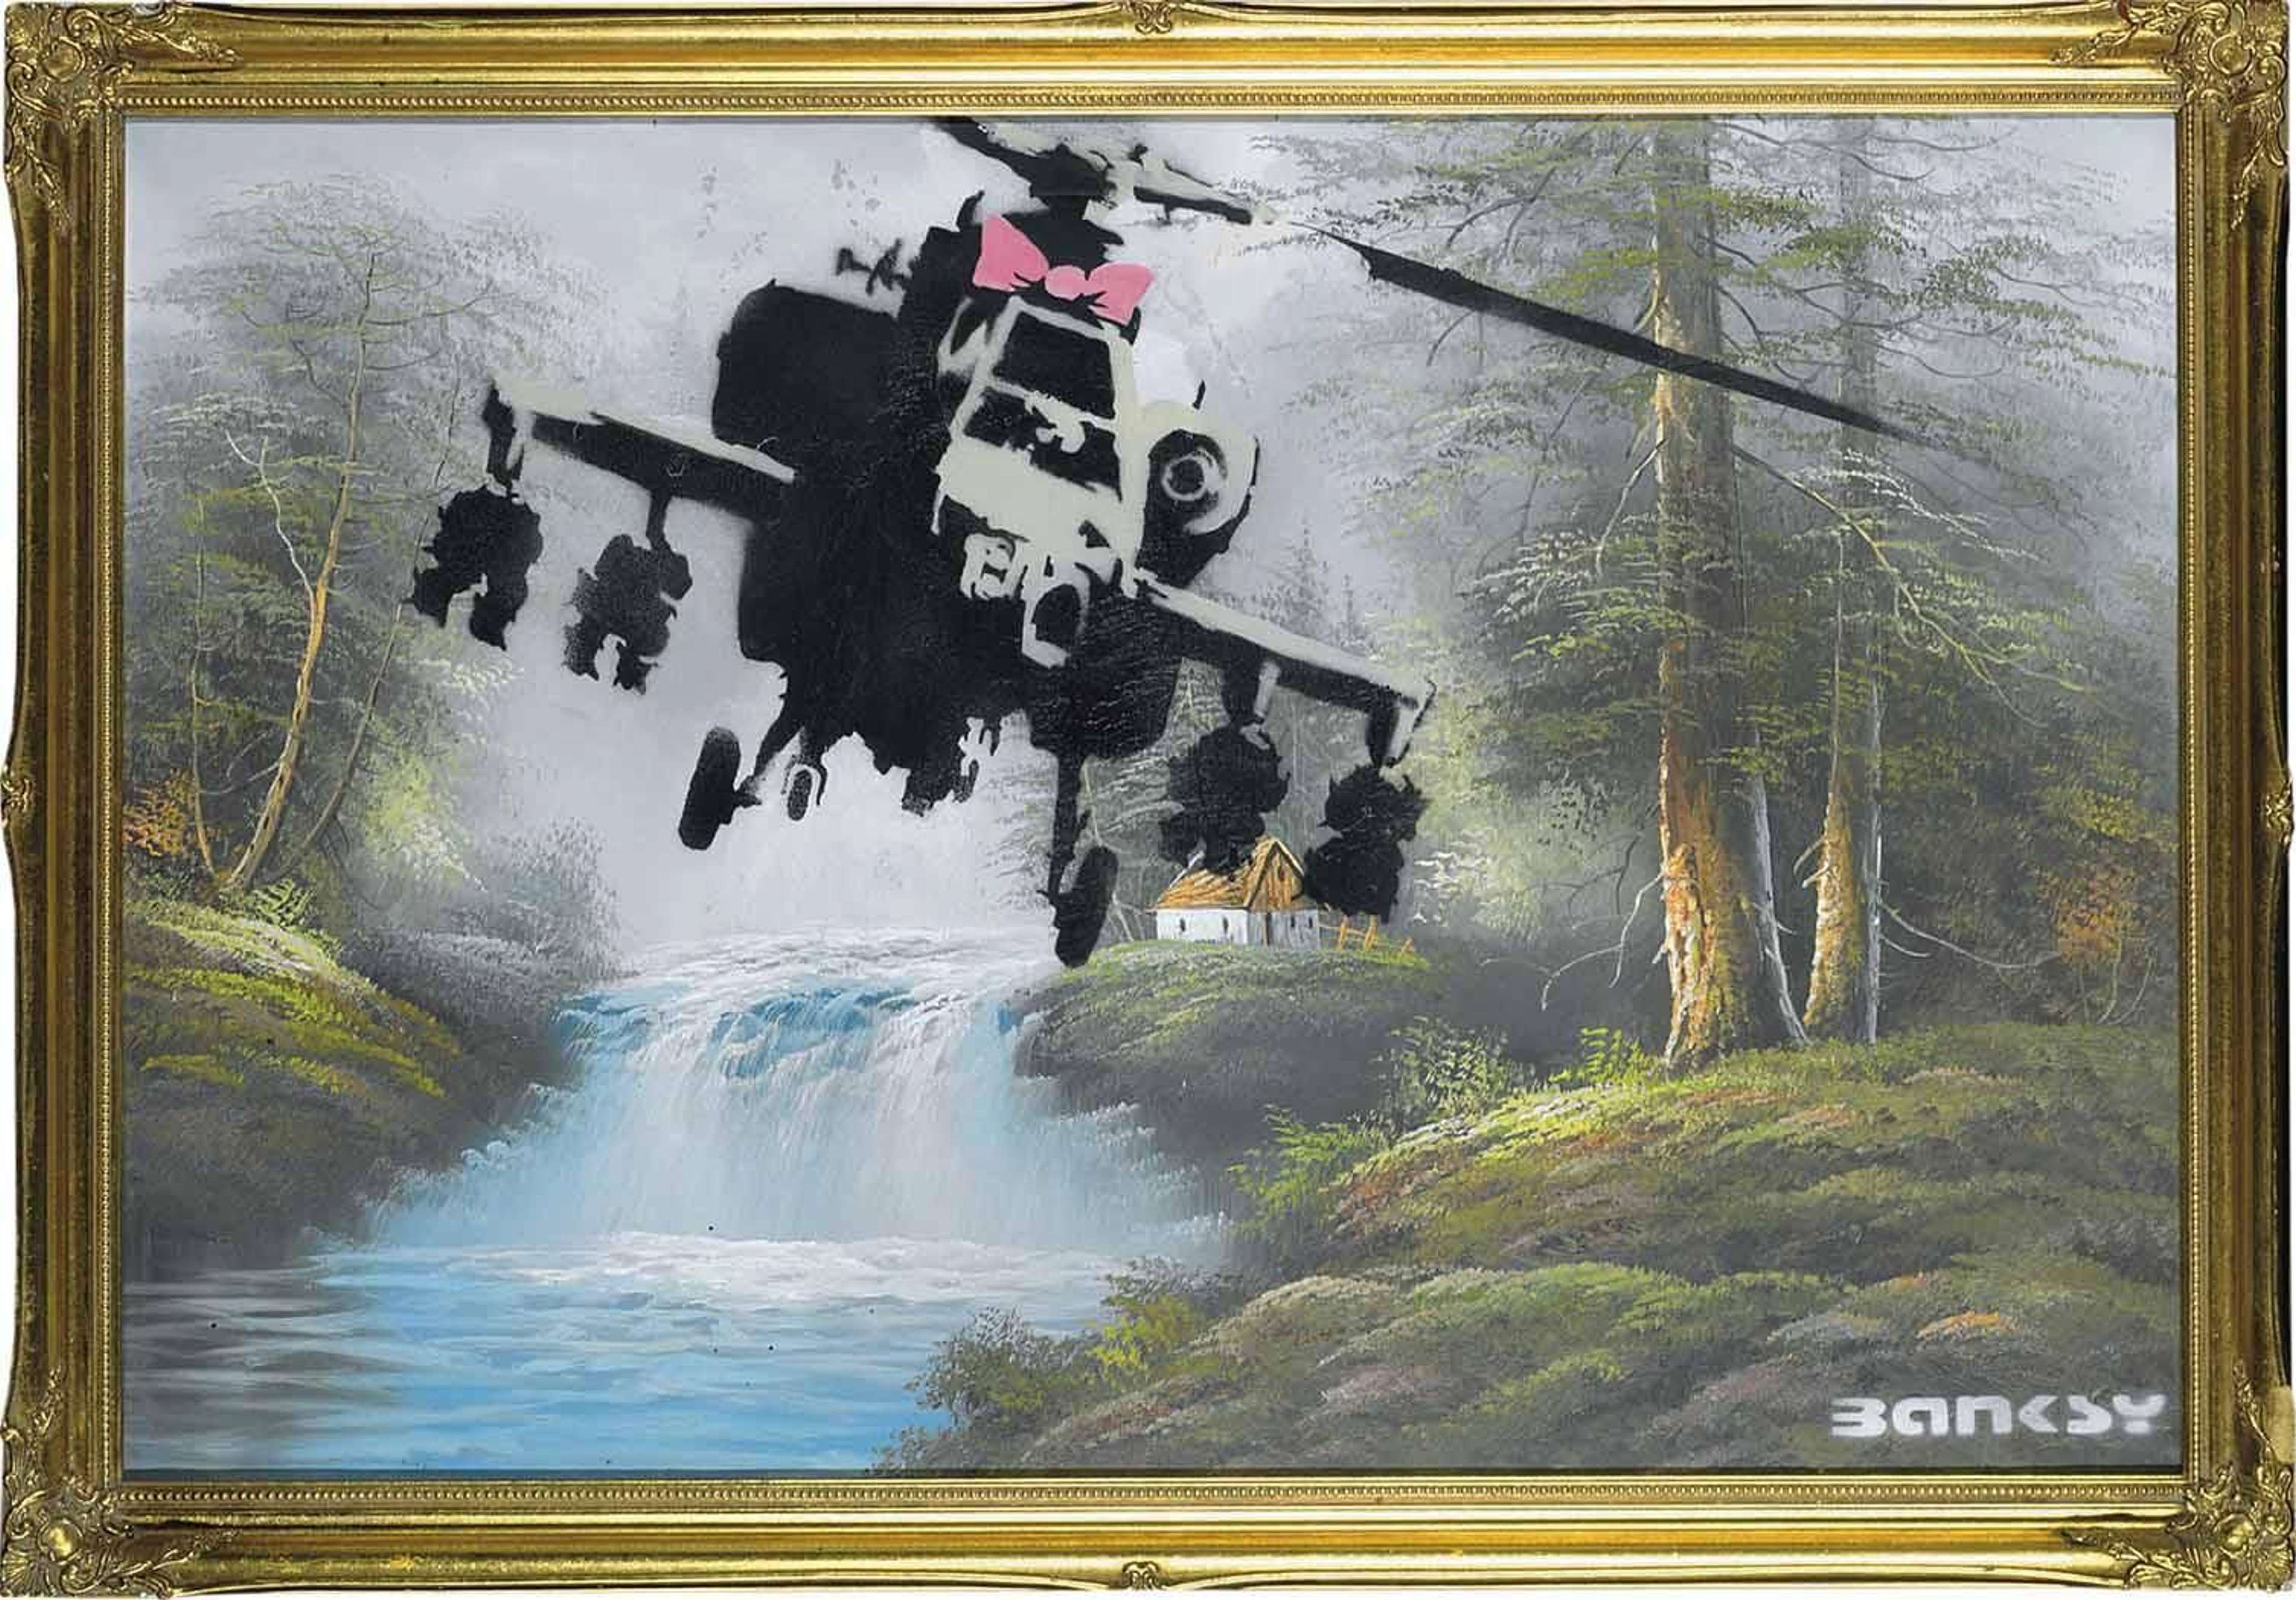 Banksy's Corrupted Oil. An oil painting of a countryside landscape with a military helicopter with a pink bow flying above it.